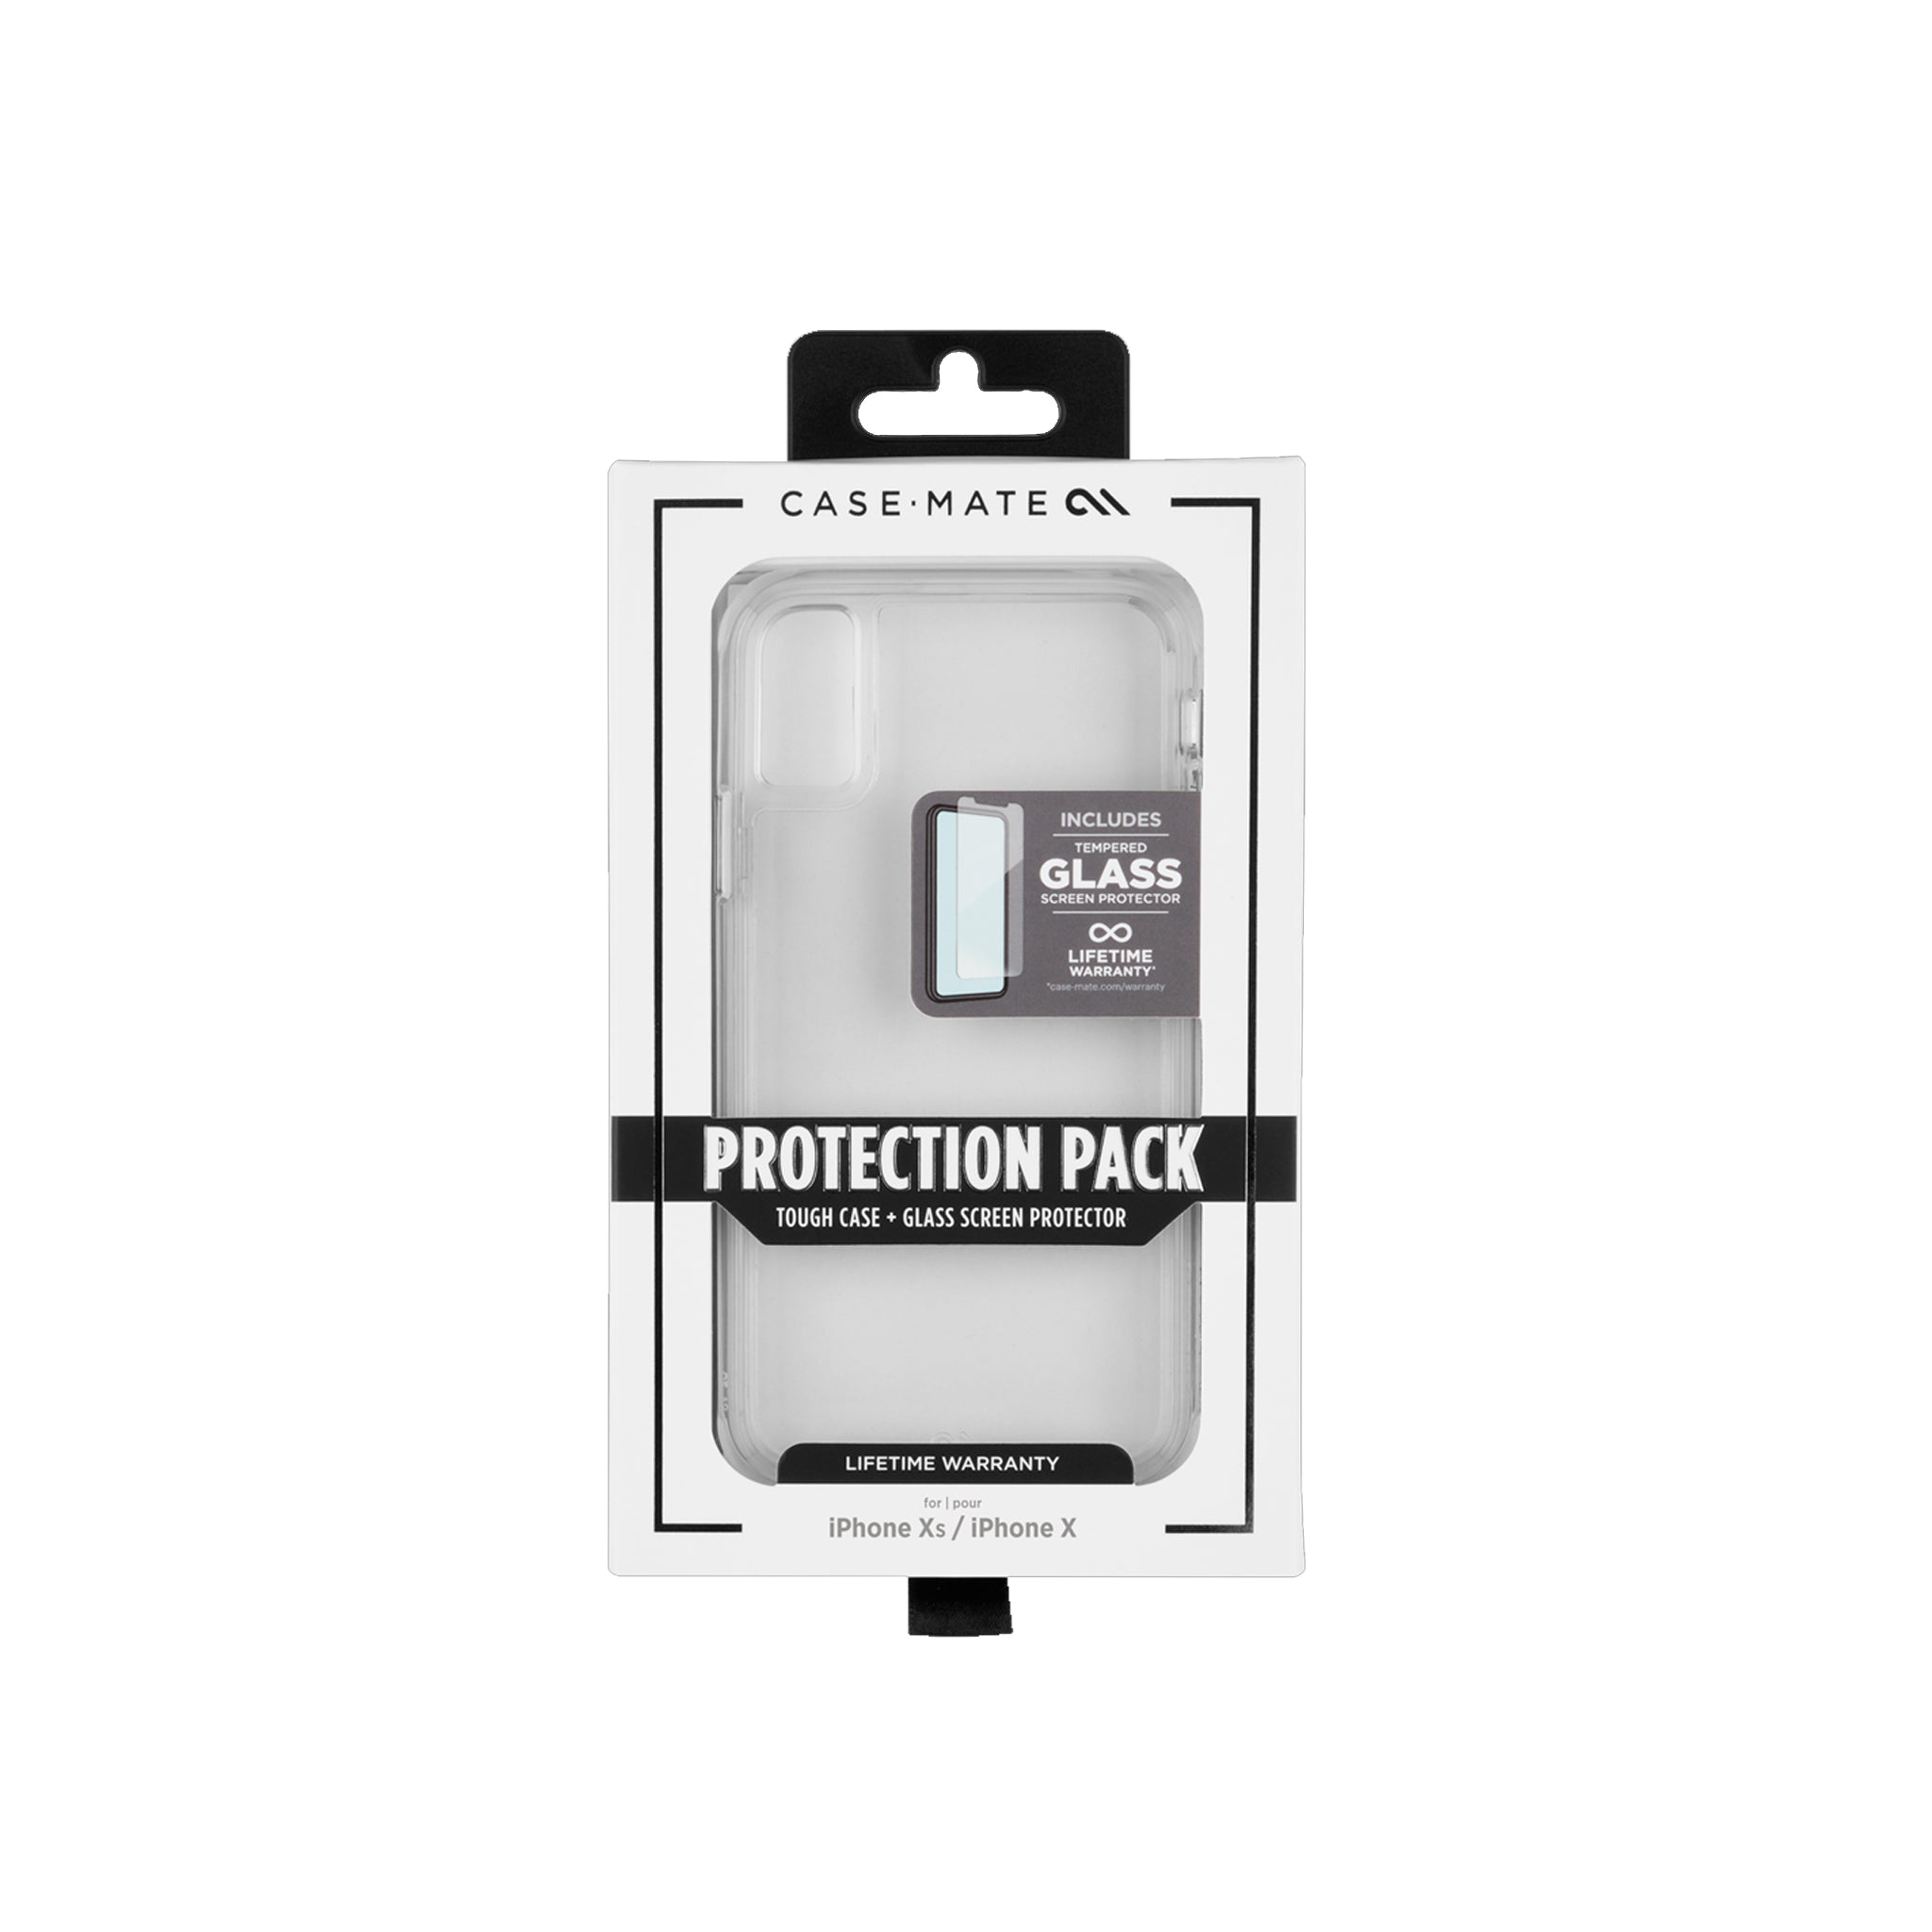 Case-mate - Protection Pack Tough Case And Glass Screen Protector For Apple iPhone Xs / X - Clear